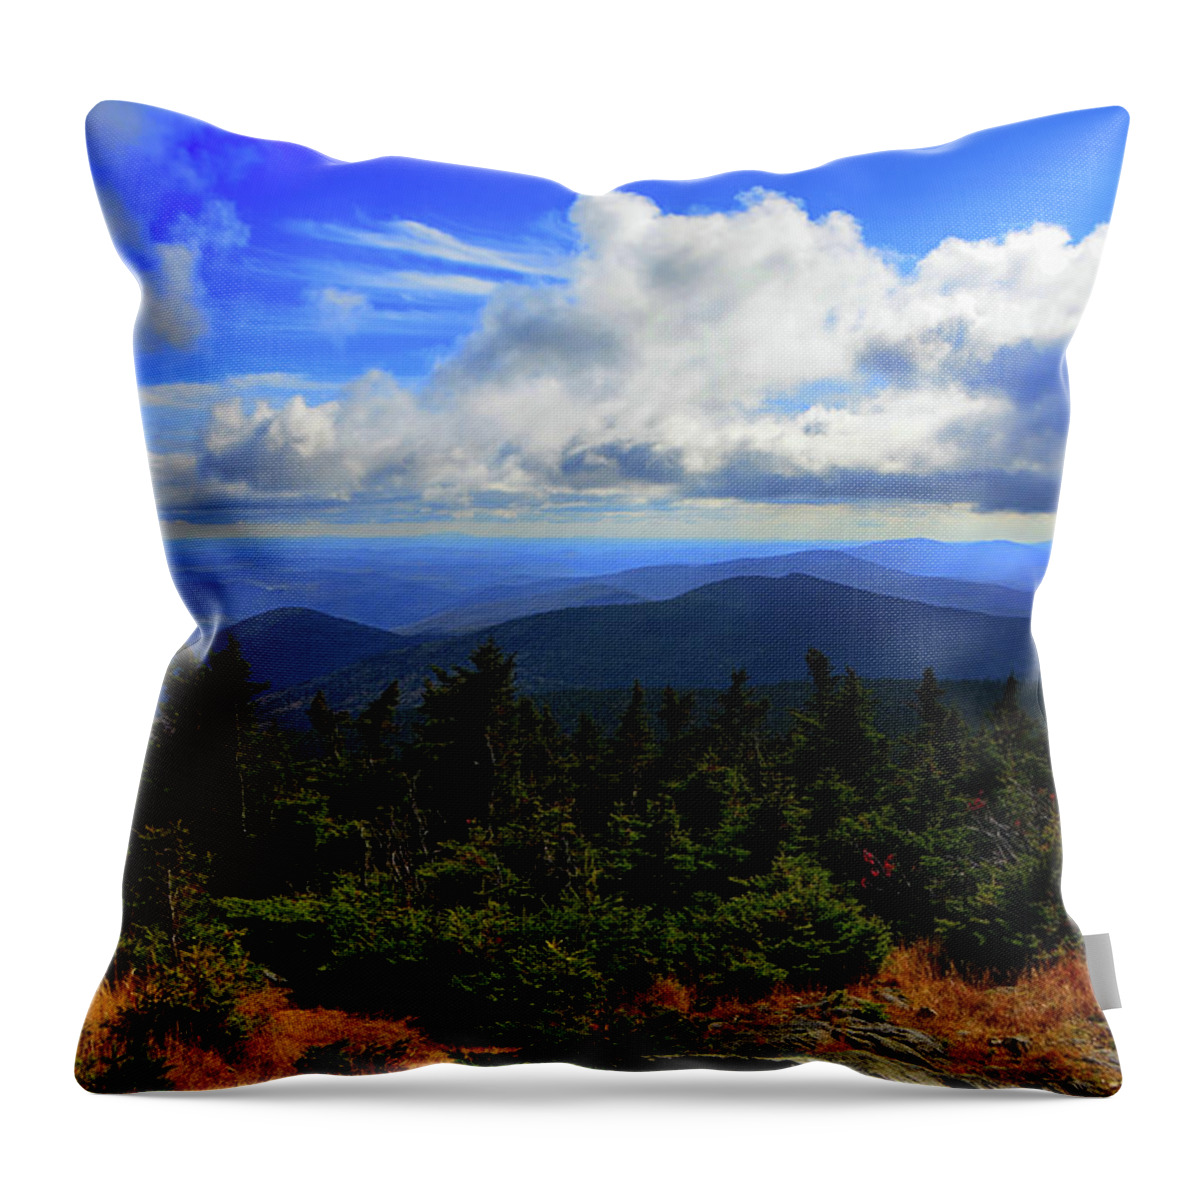 Looking Southeast From Killington Summit Throw Pillow featuring the photograph Looking Southeast From Killington Summit by Raymond Salani III